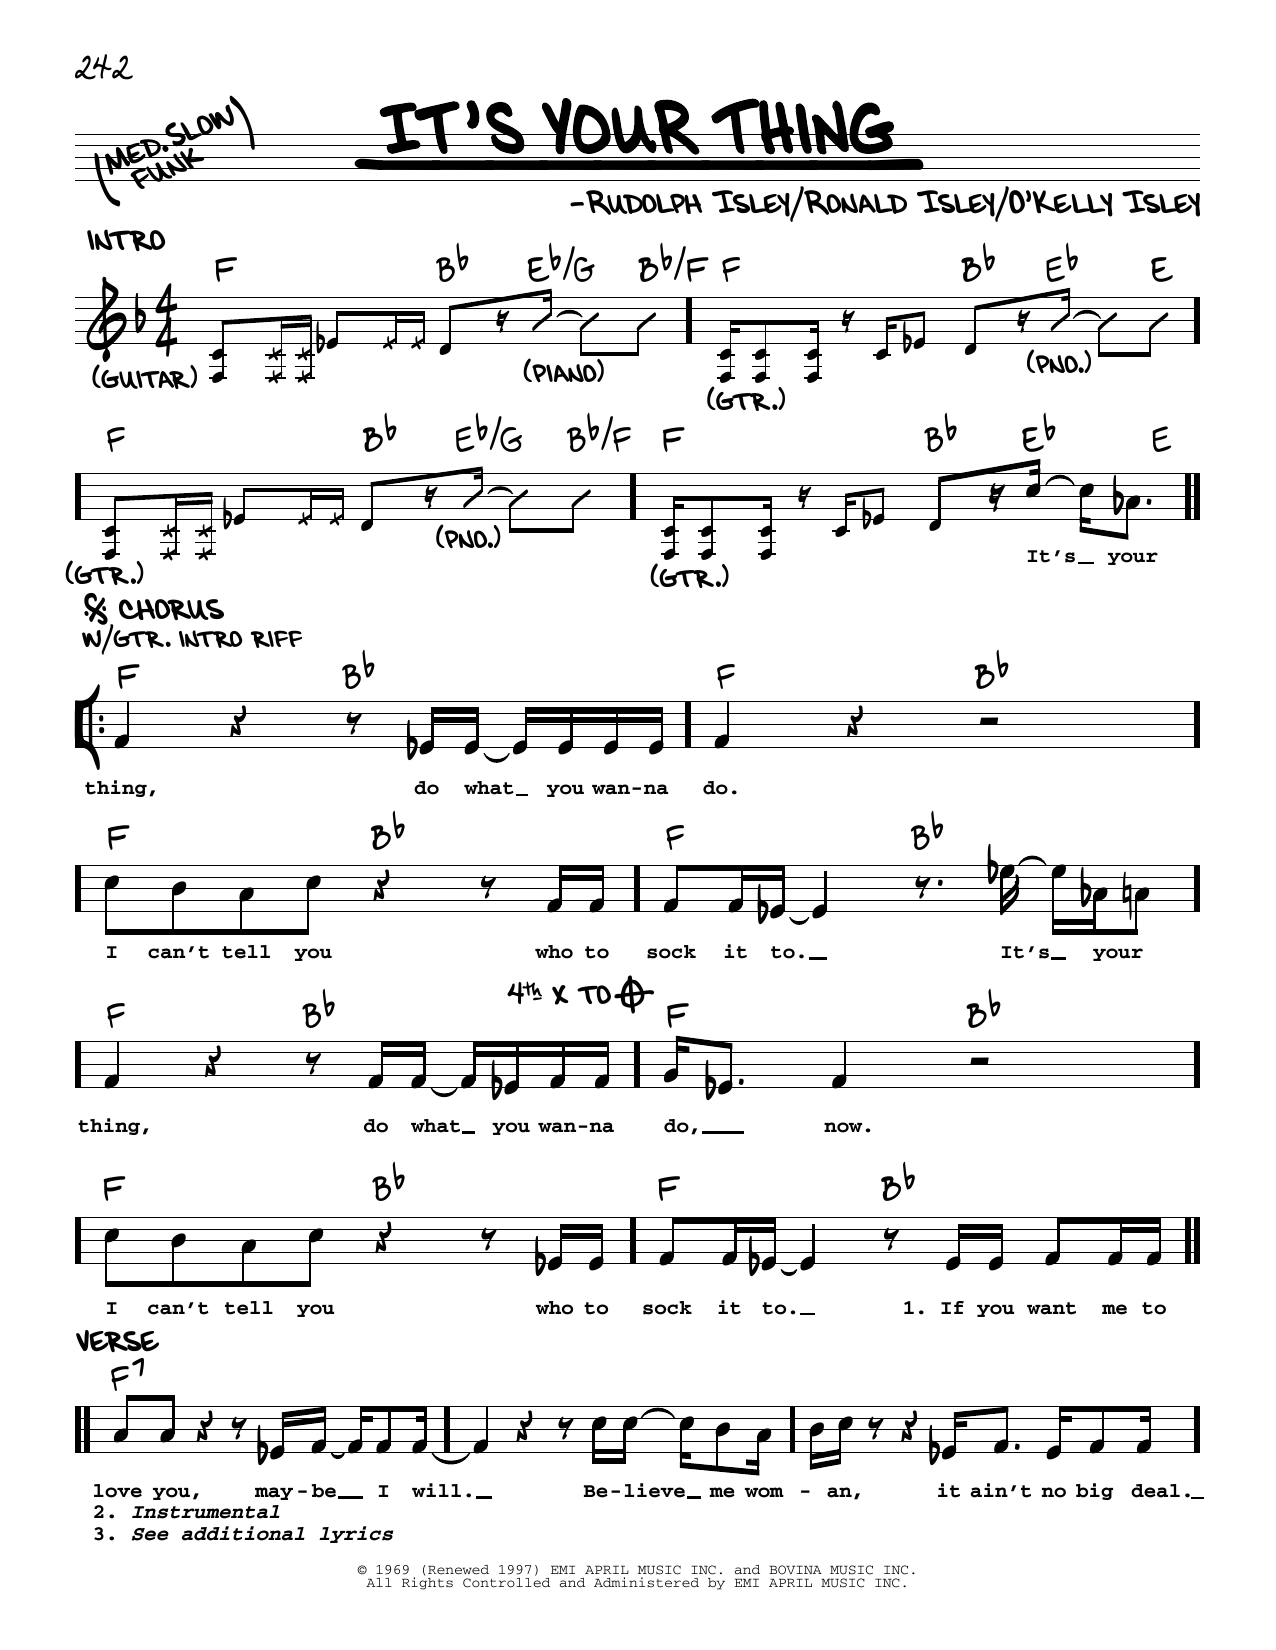 Download The Isley Brothers It's Your Thing Sheet Music